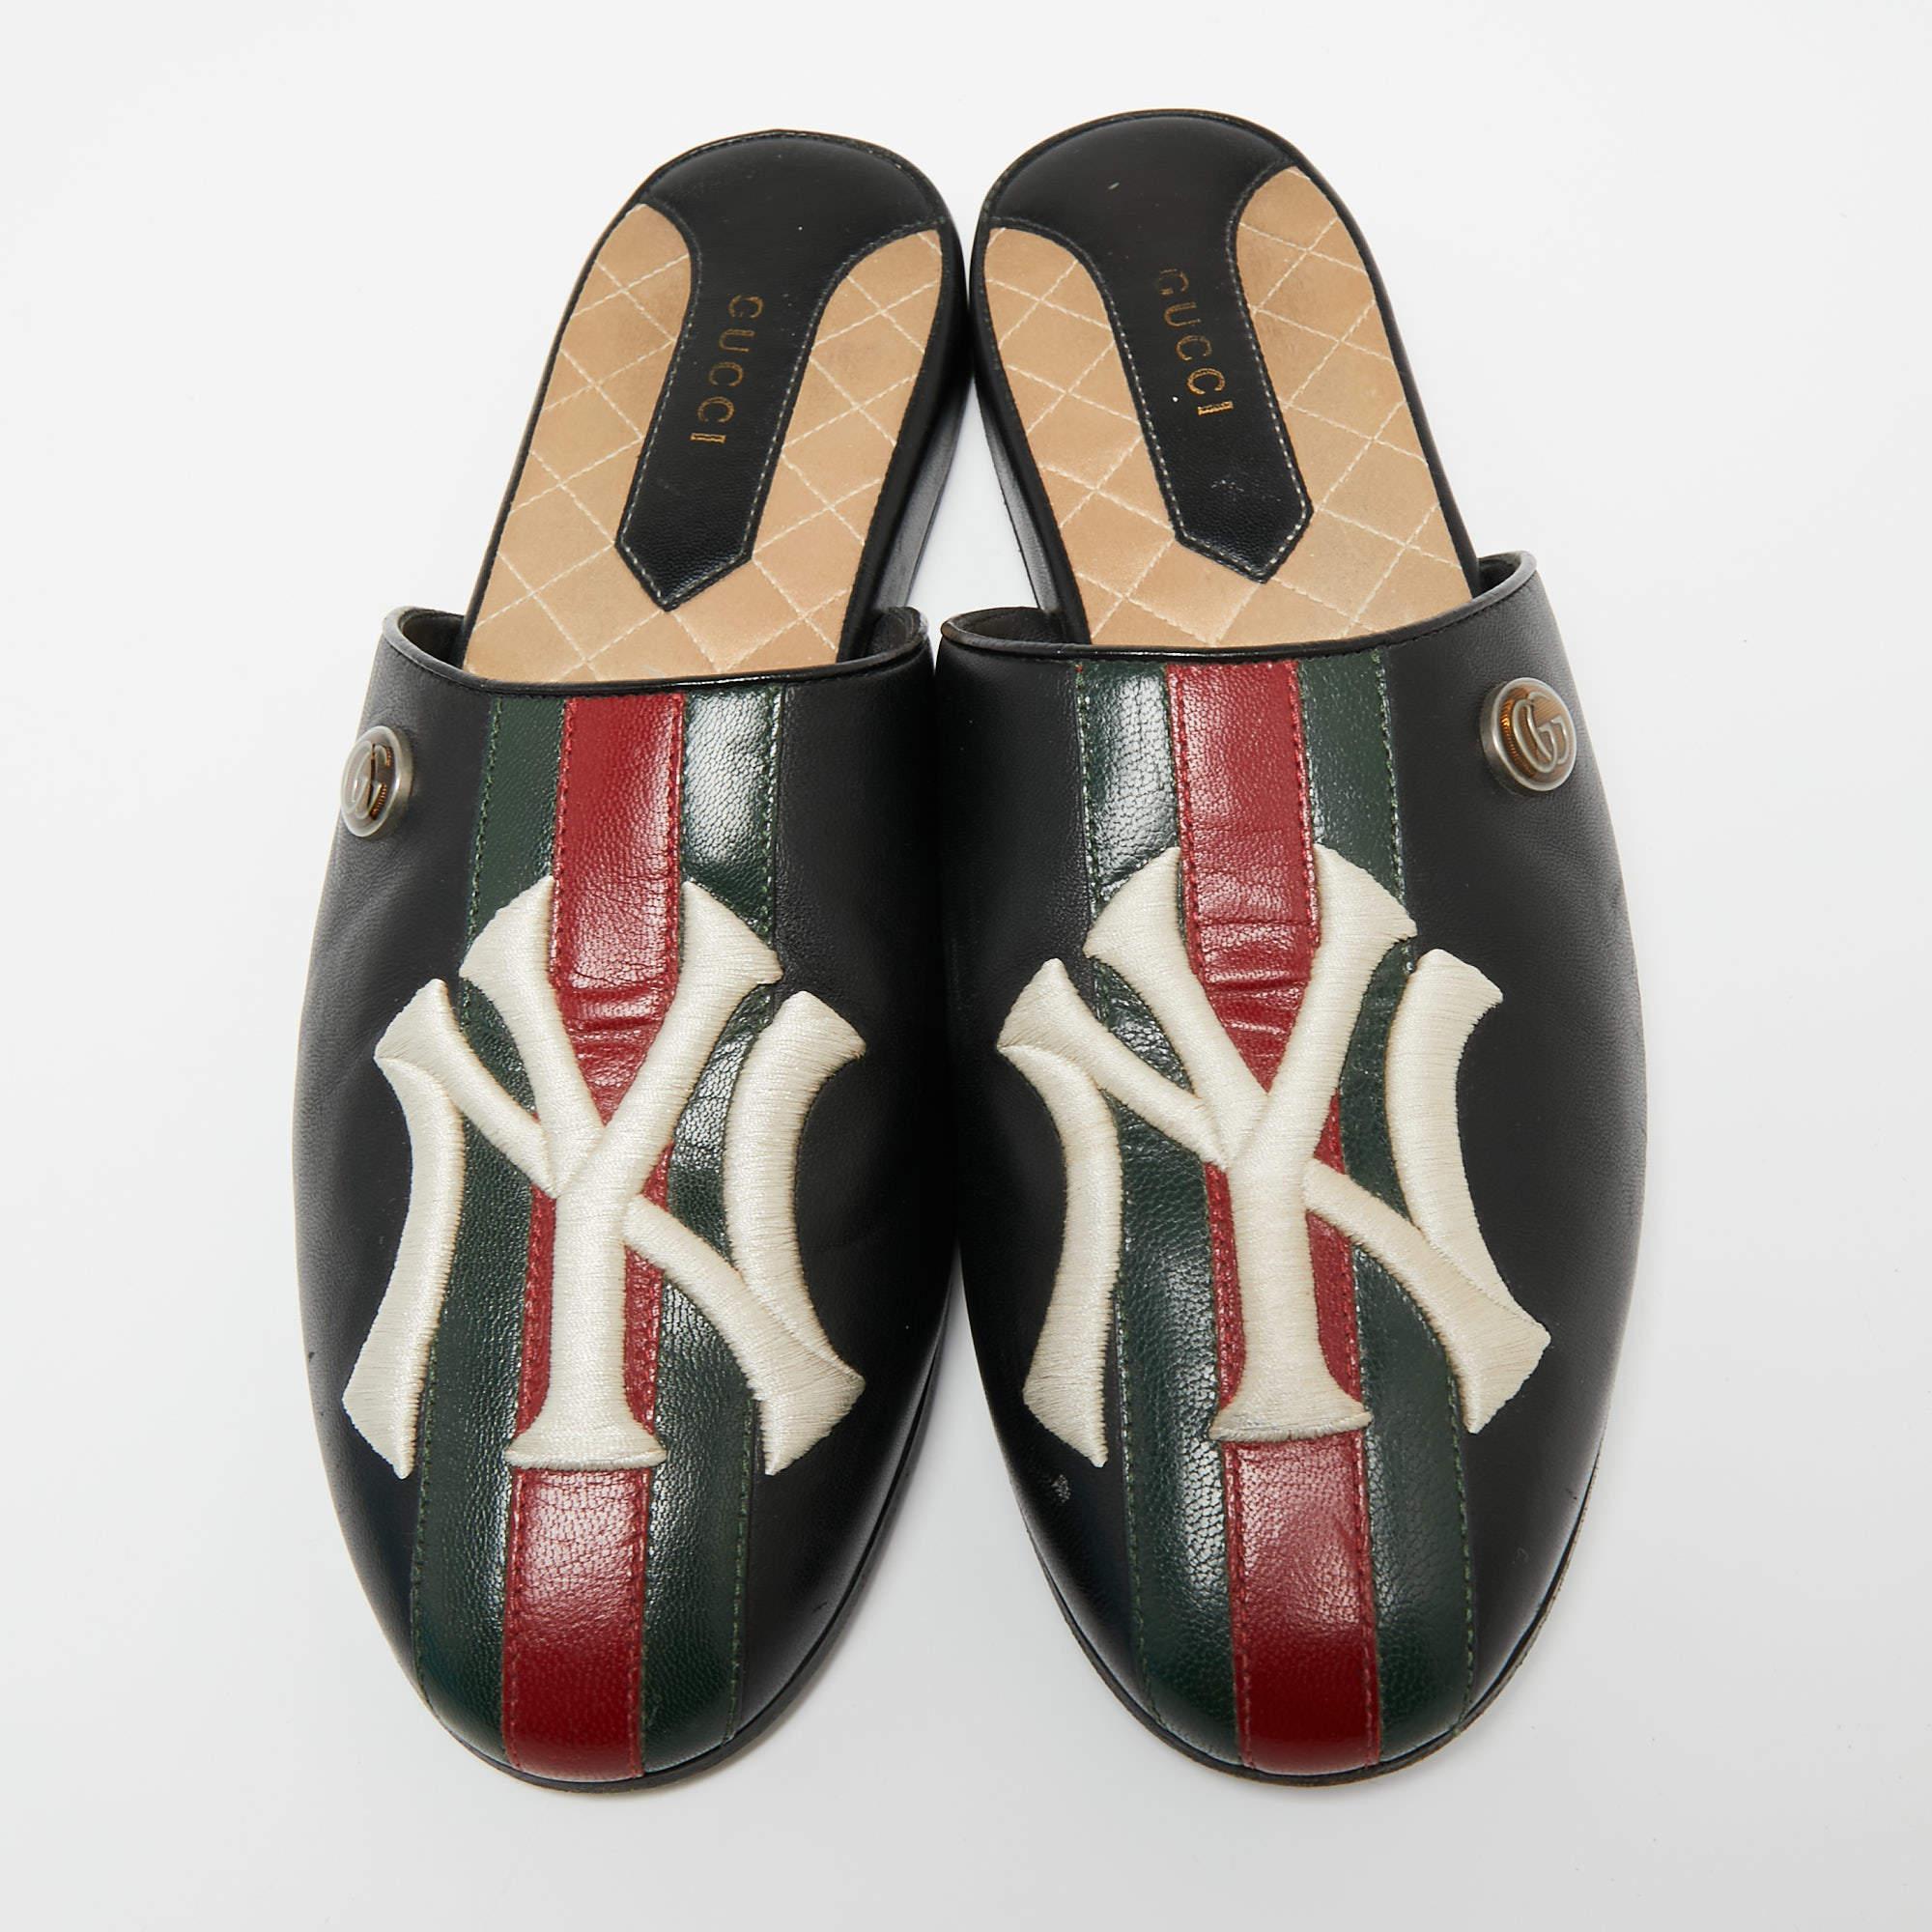 Gucci Men's New York Yankees GG Supreme Loafers Flats